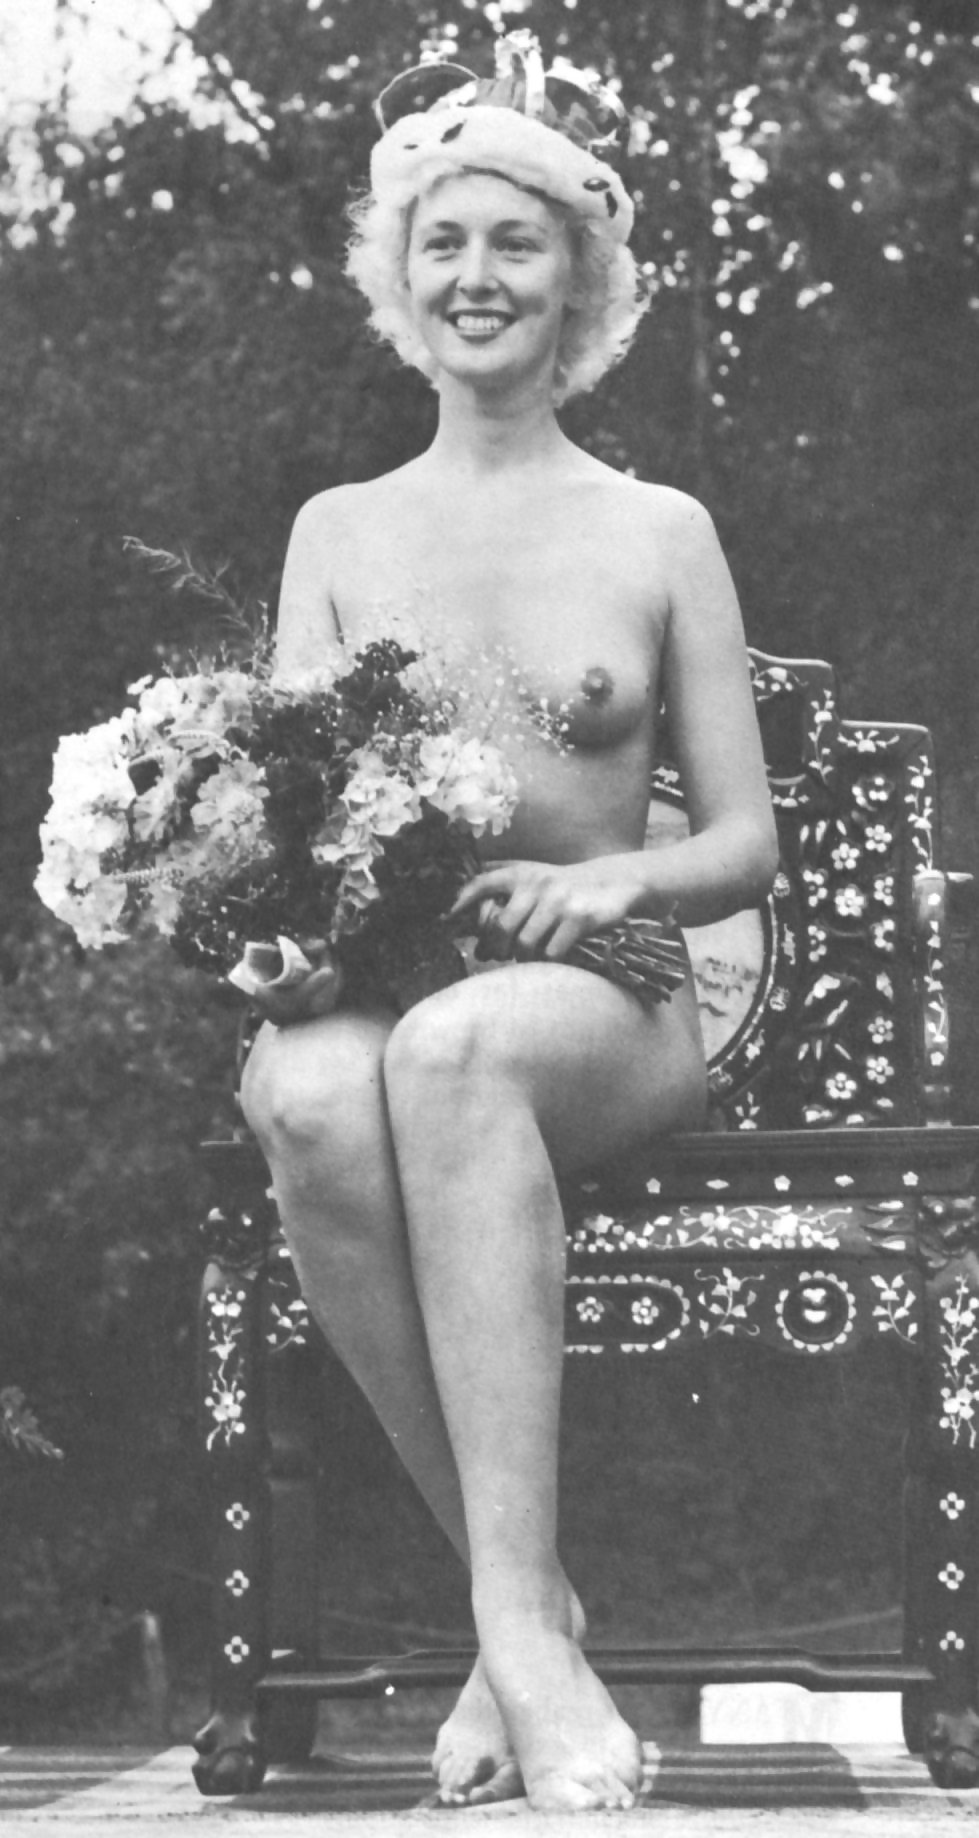 A Few Vintage Naturist Girls That Really Turn Me On (2) #16391119